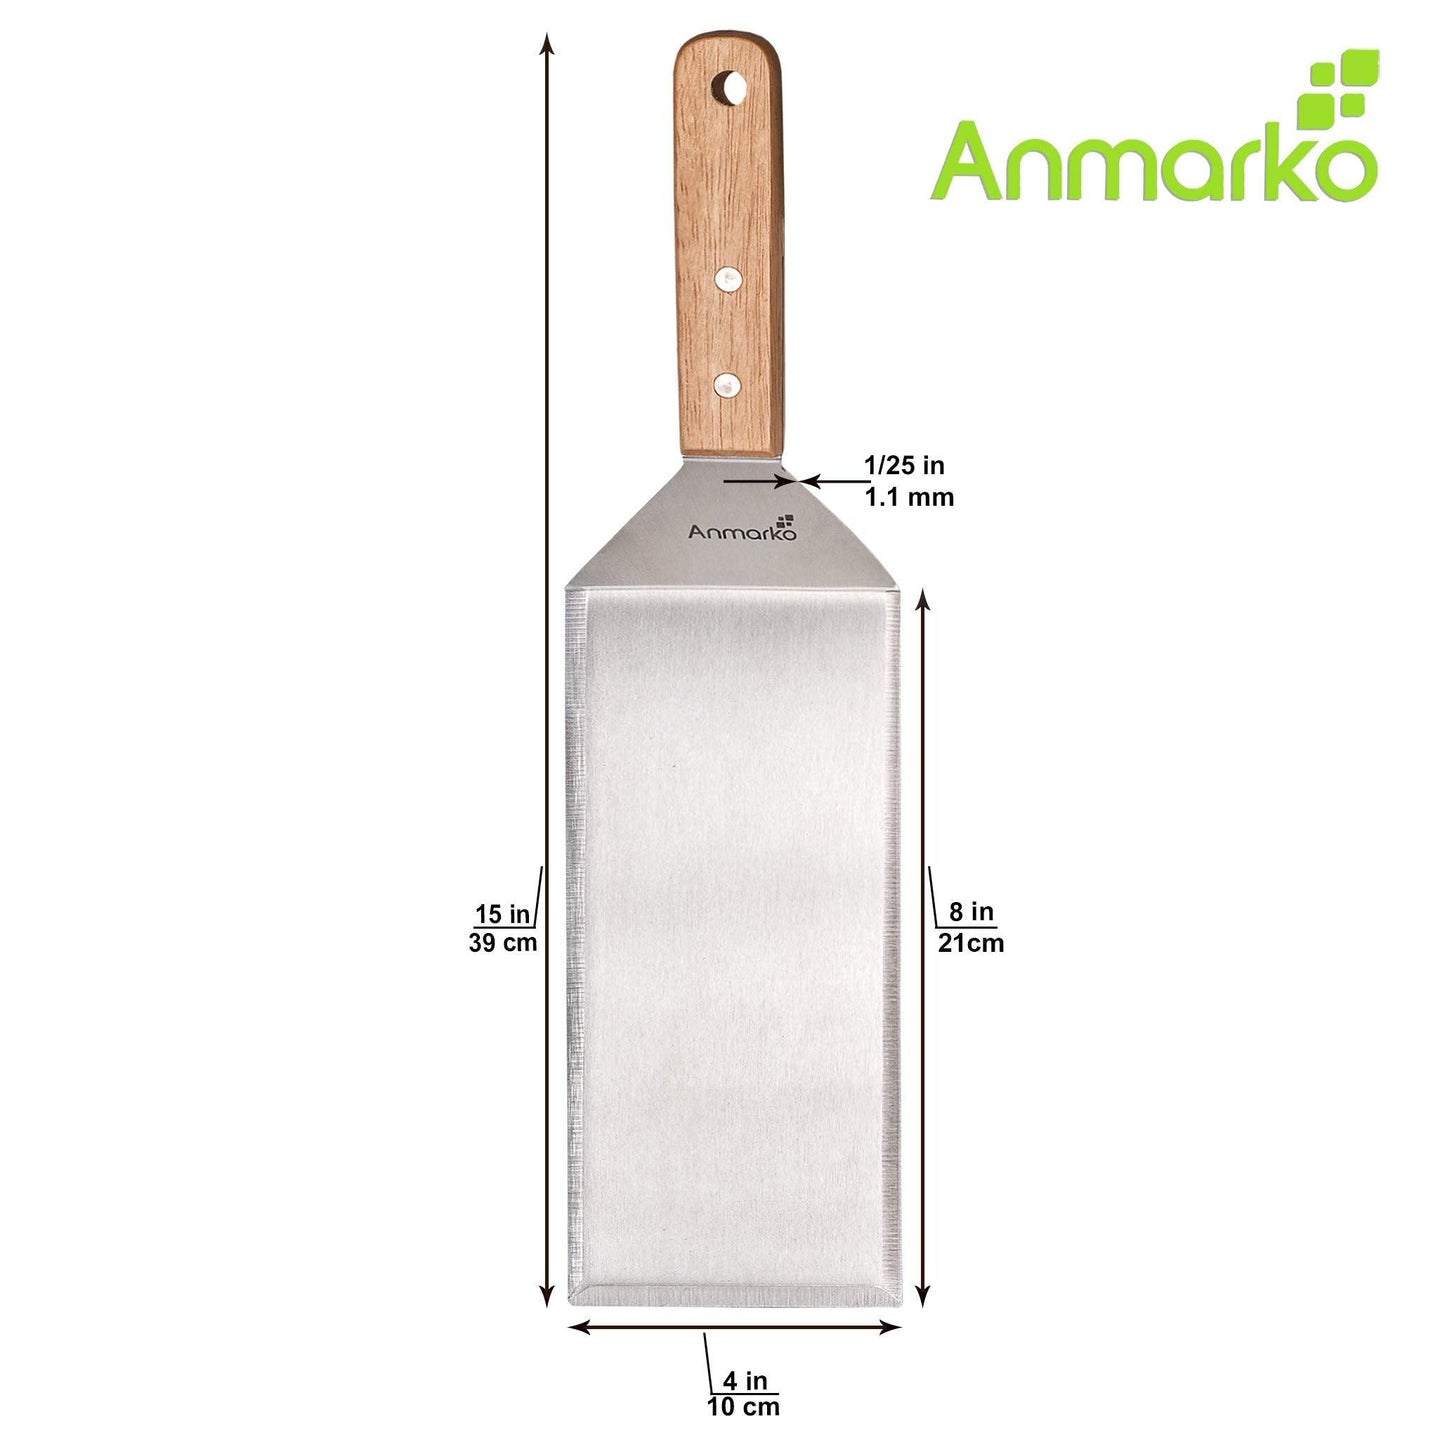 Stainless Steel Metal Griddle 4 x 8 inch Spatula - Spatula Hamburger Turner Scraper - Pancake Flipper - Great for BBQ Grill and Flat Top Griddle - Commercial Grade - CookCave